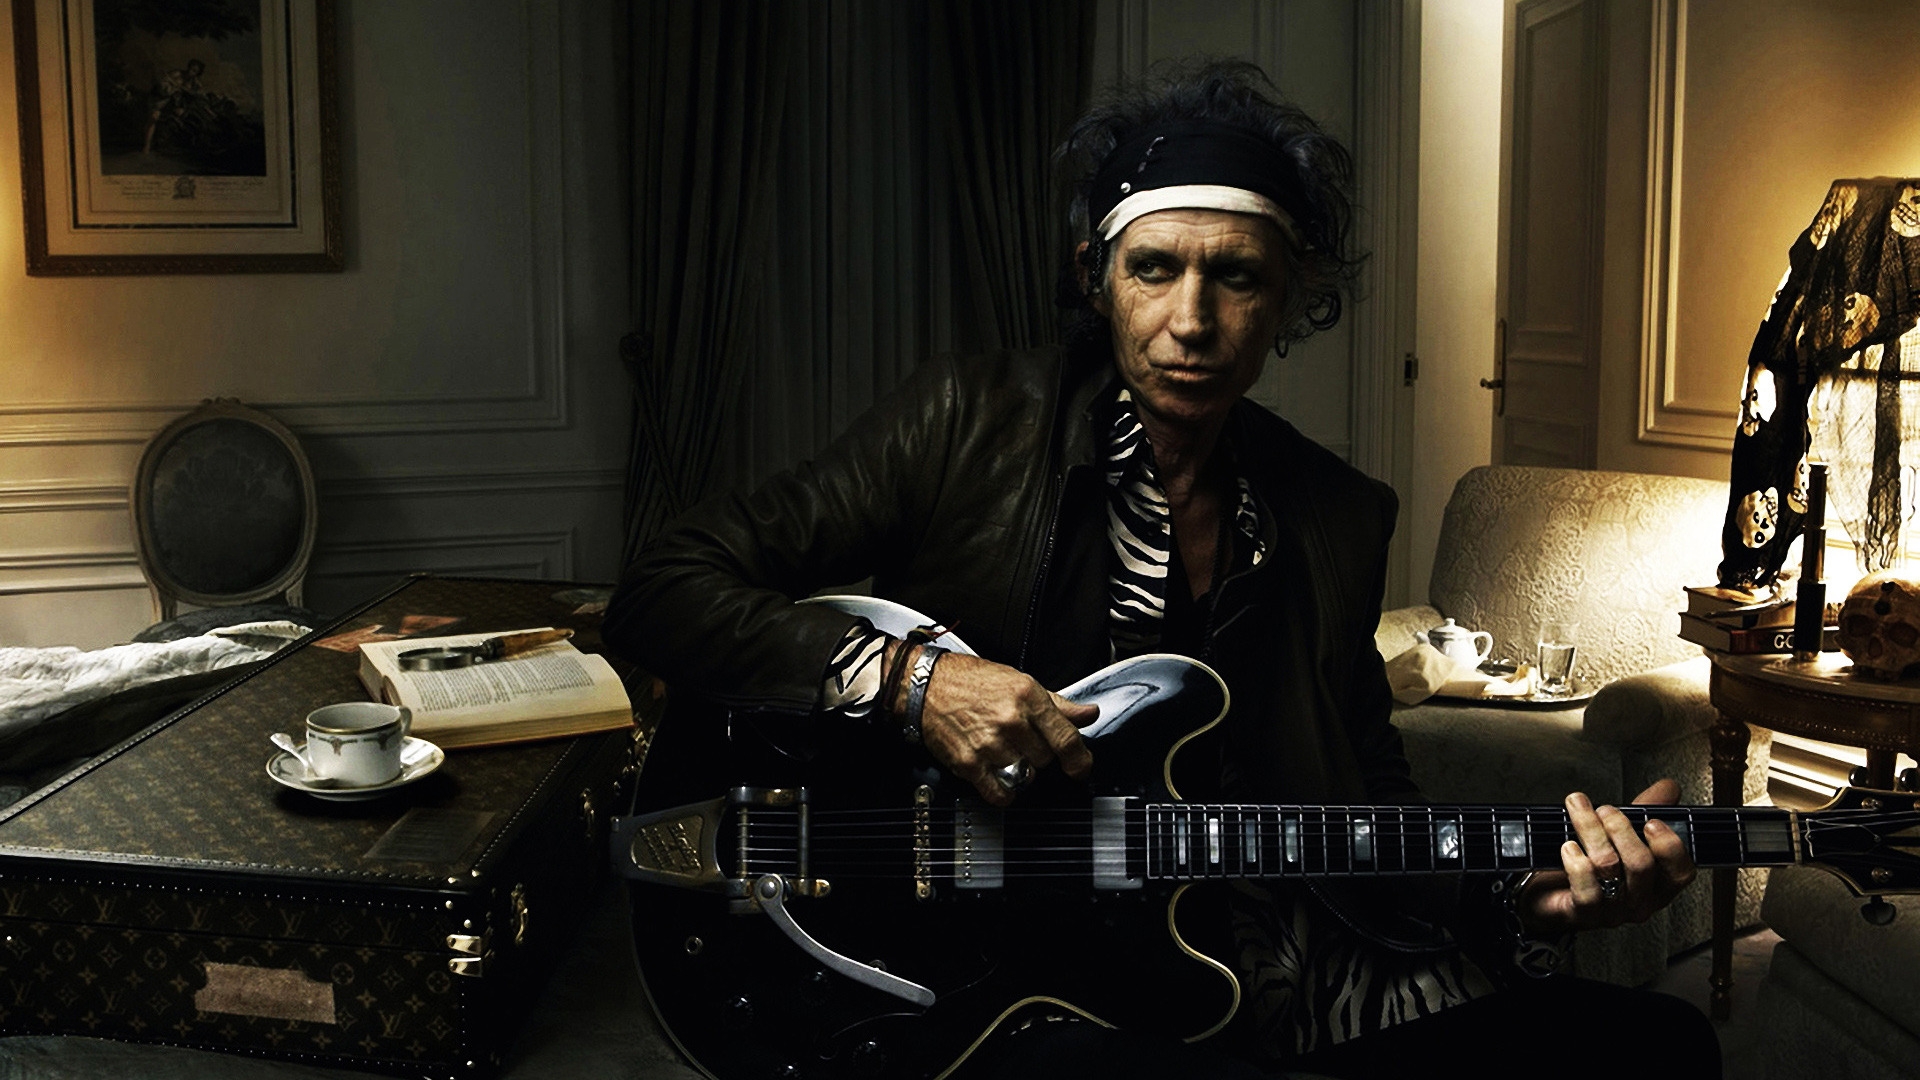 Keith Richards Guitarist Rolling Stones for 1920 x 1080 HDTV 1080p resolution